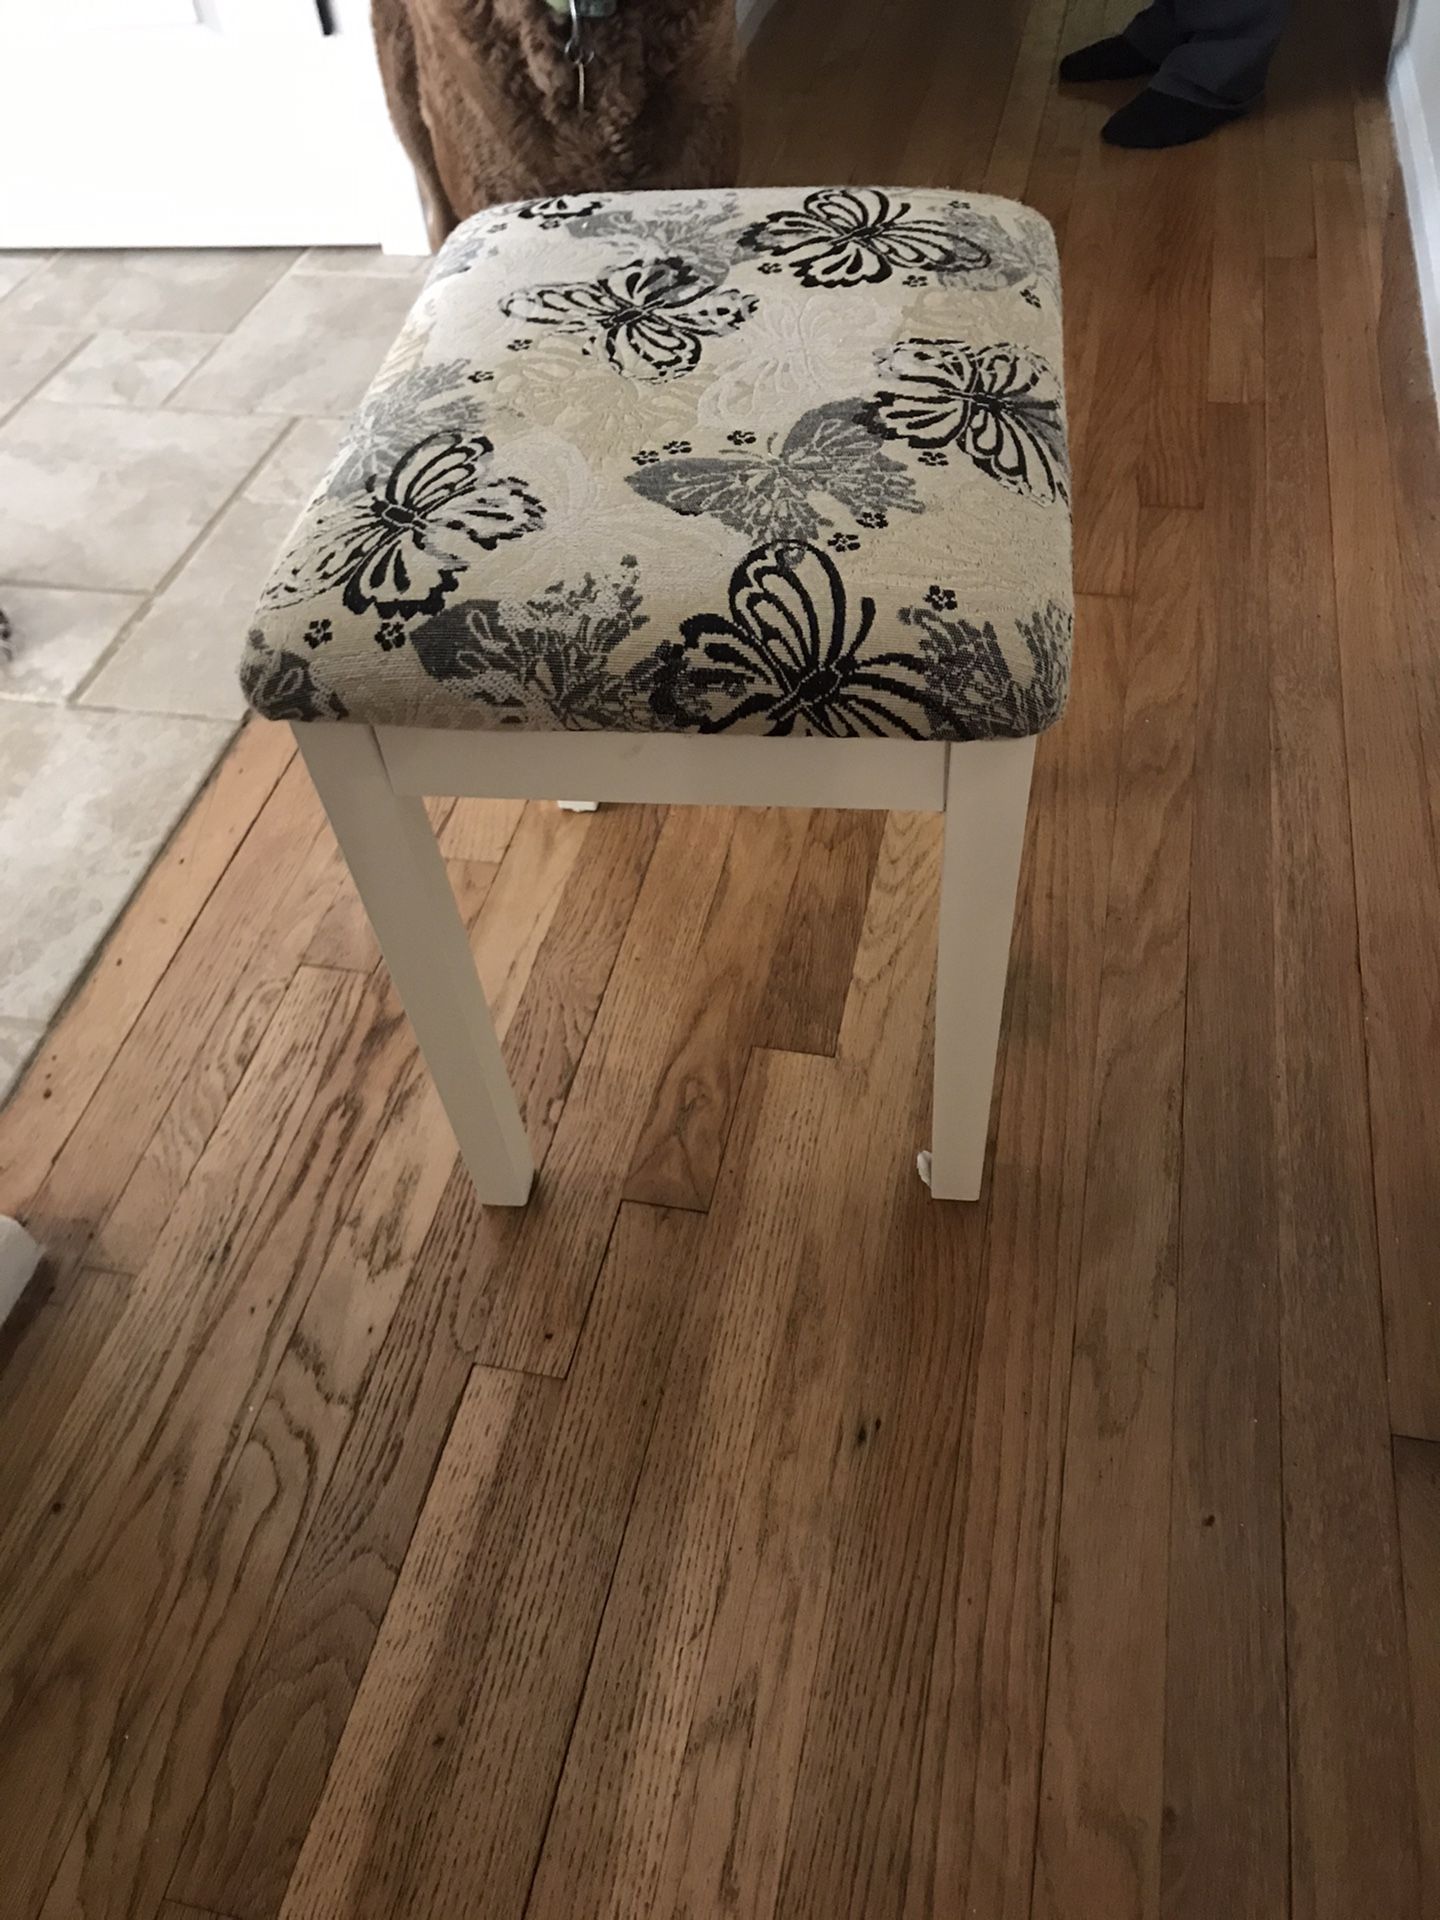 Small white stool with floral fabric top